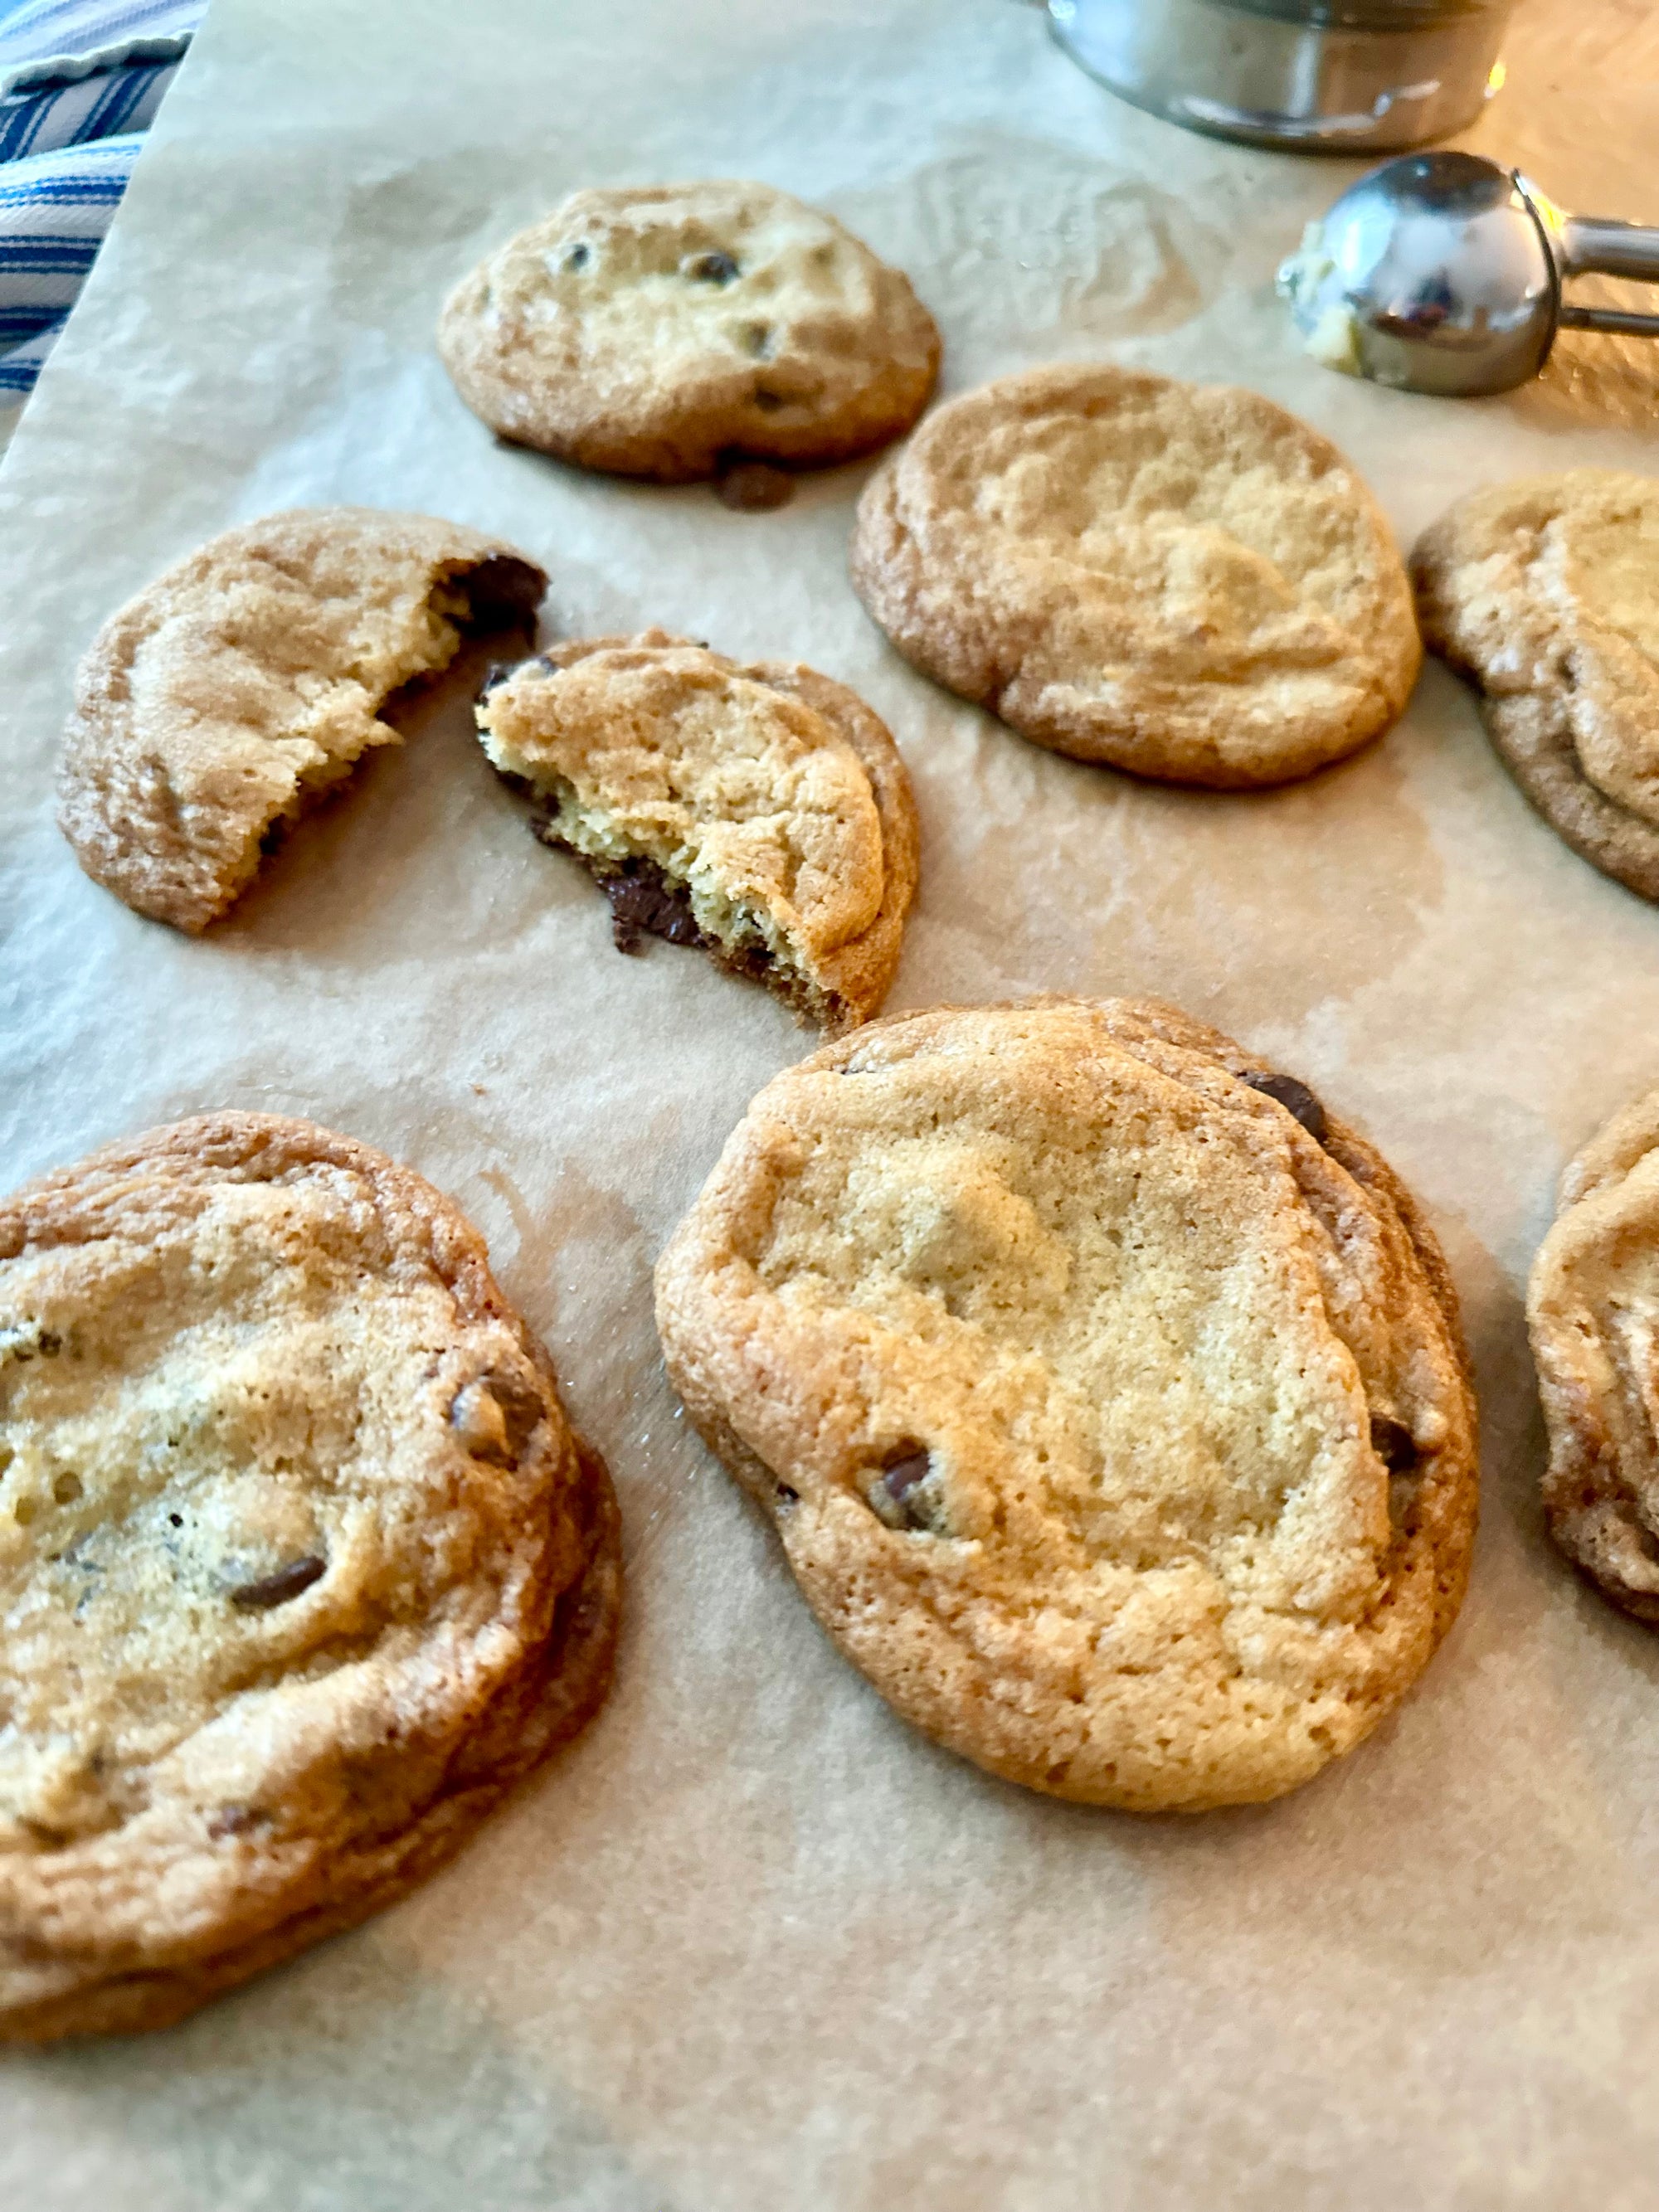 Chocolate Chip Chronicles: In Pursuit of the Perfect Cookie